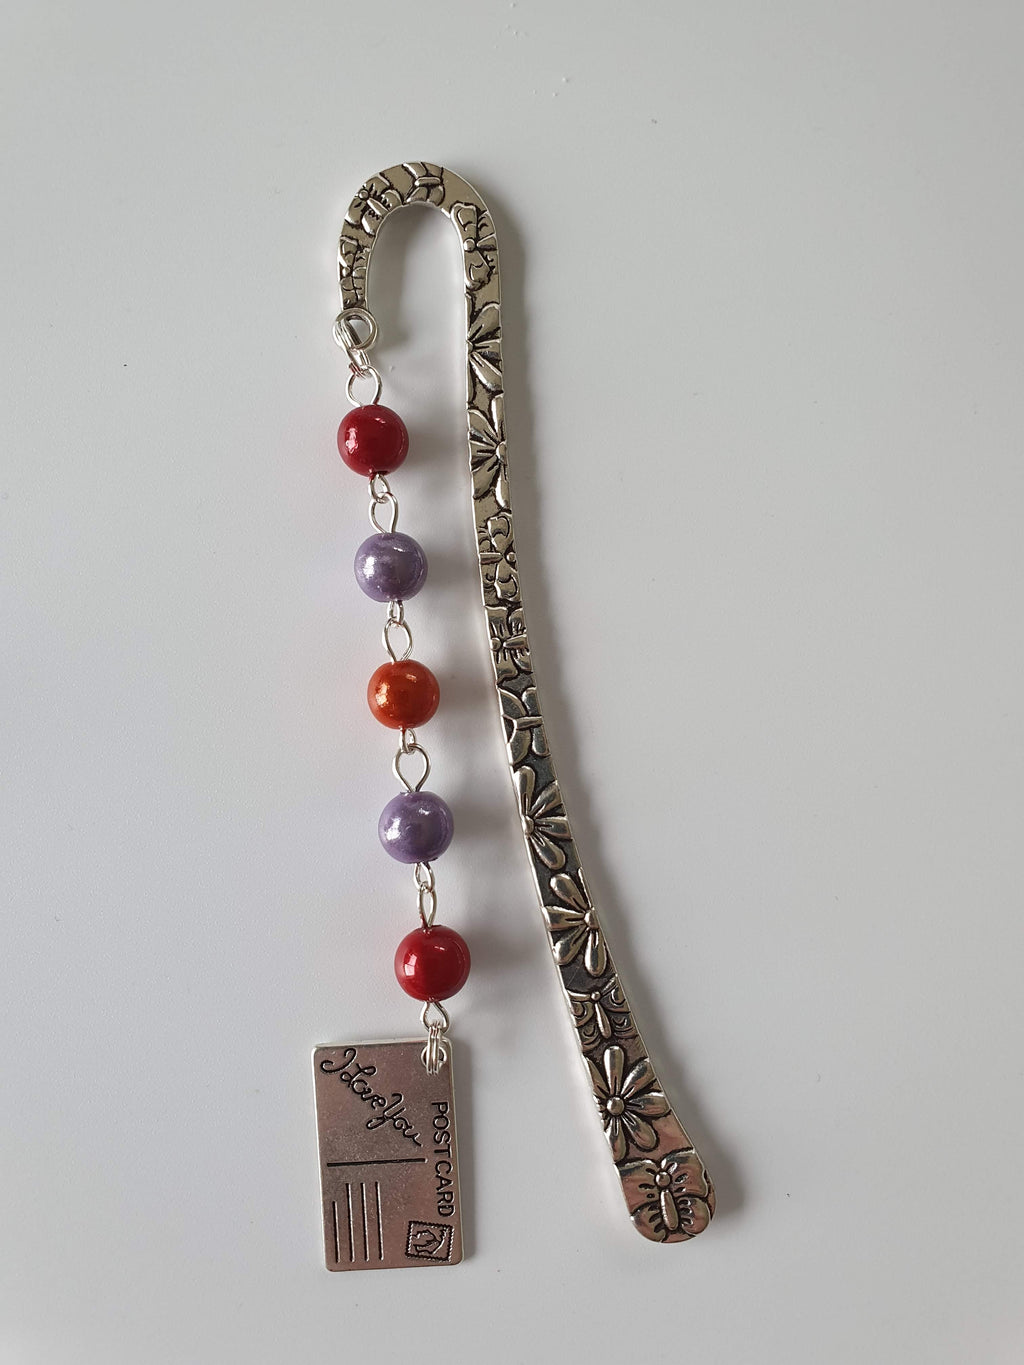 This is a picture of a silver bookmark with red and purple beads and an 'I love you' postcard charm attached